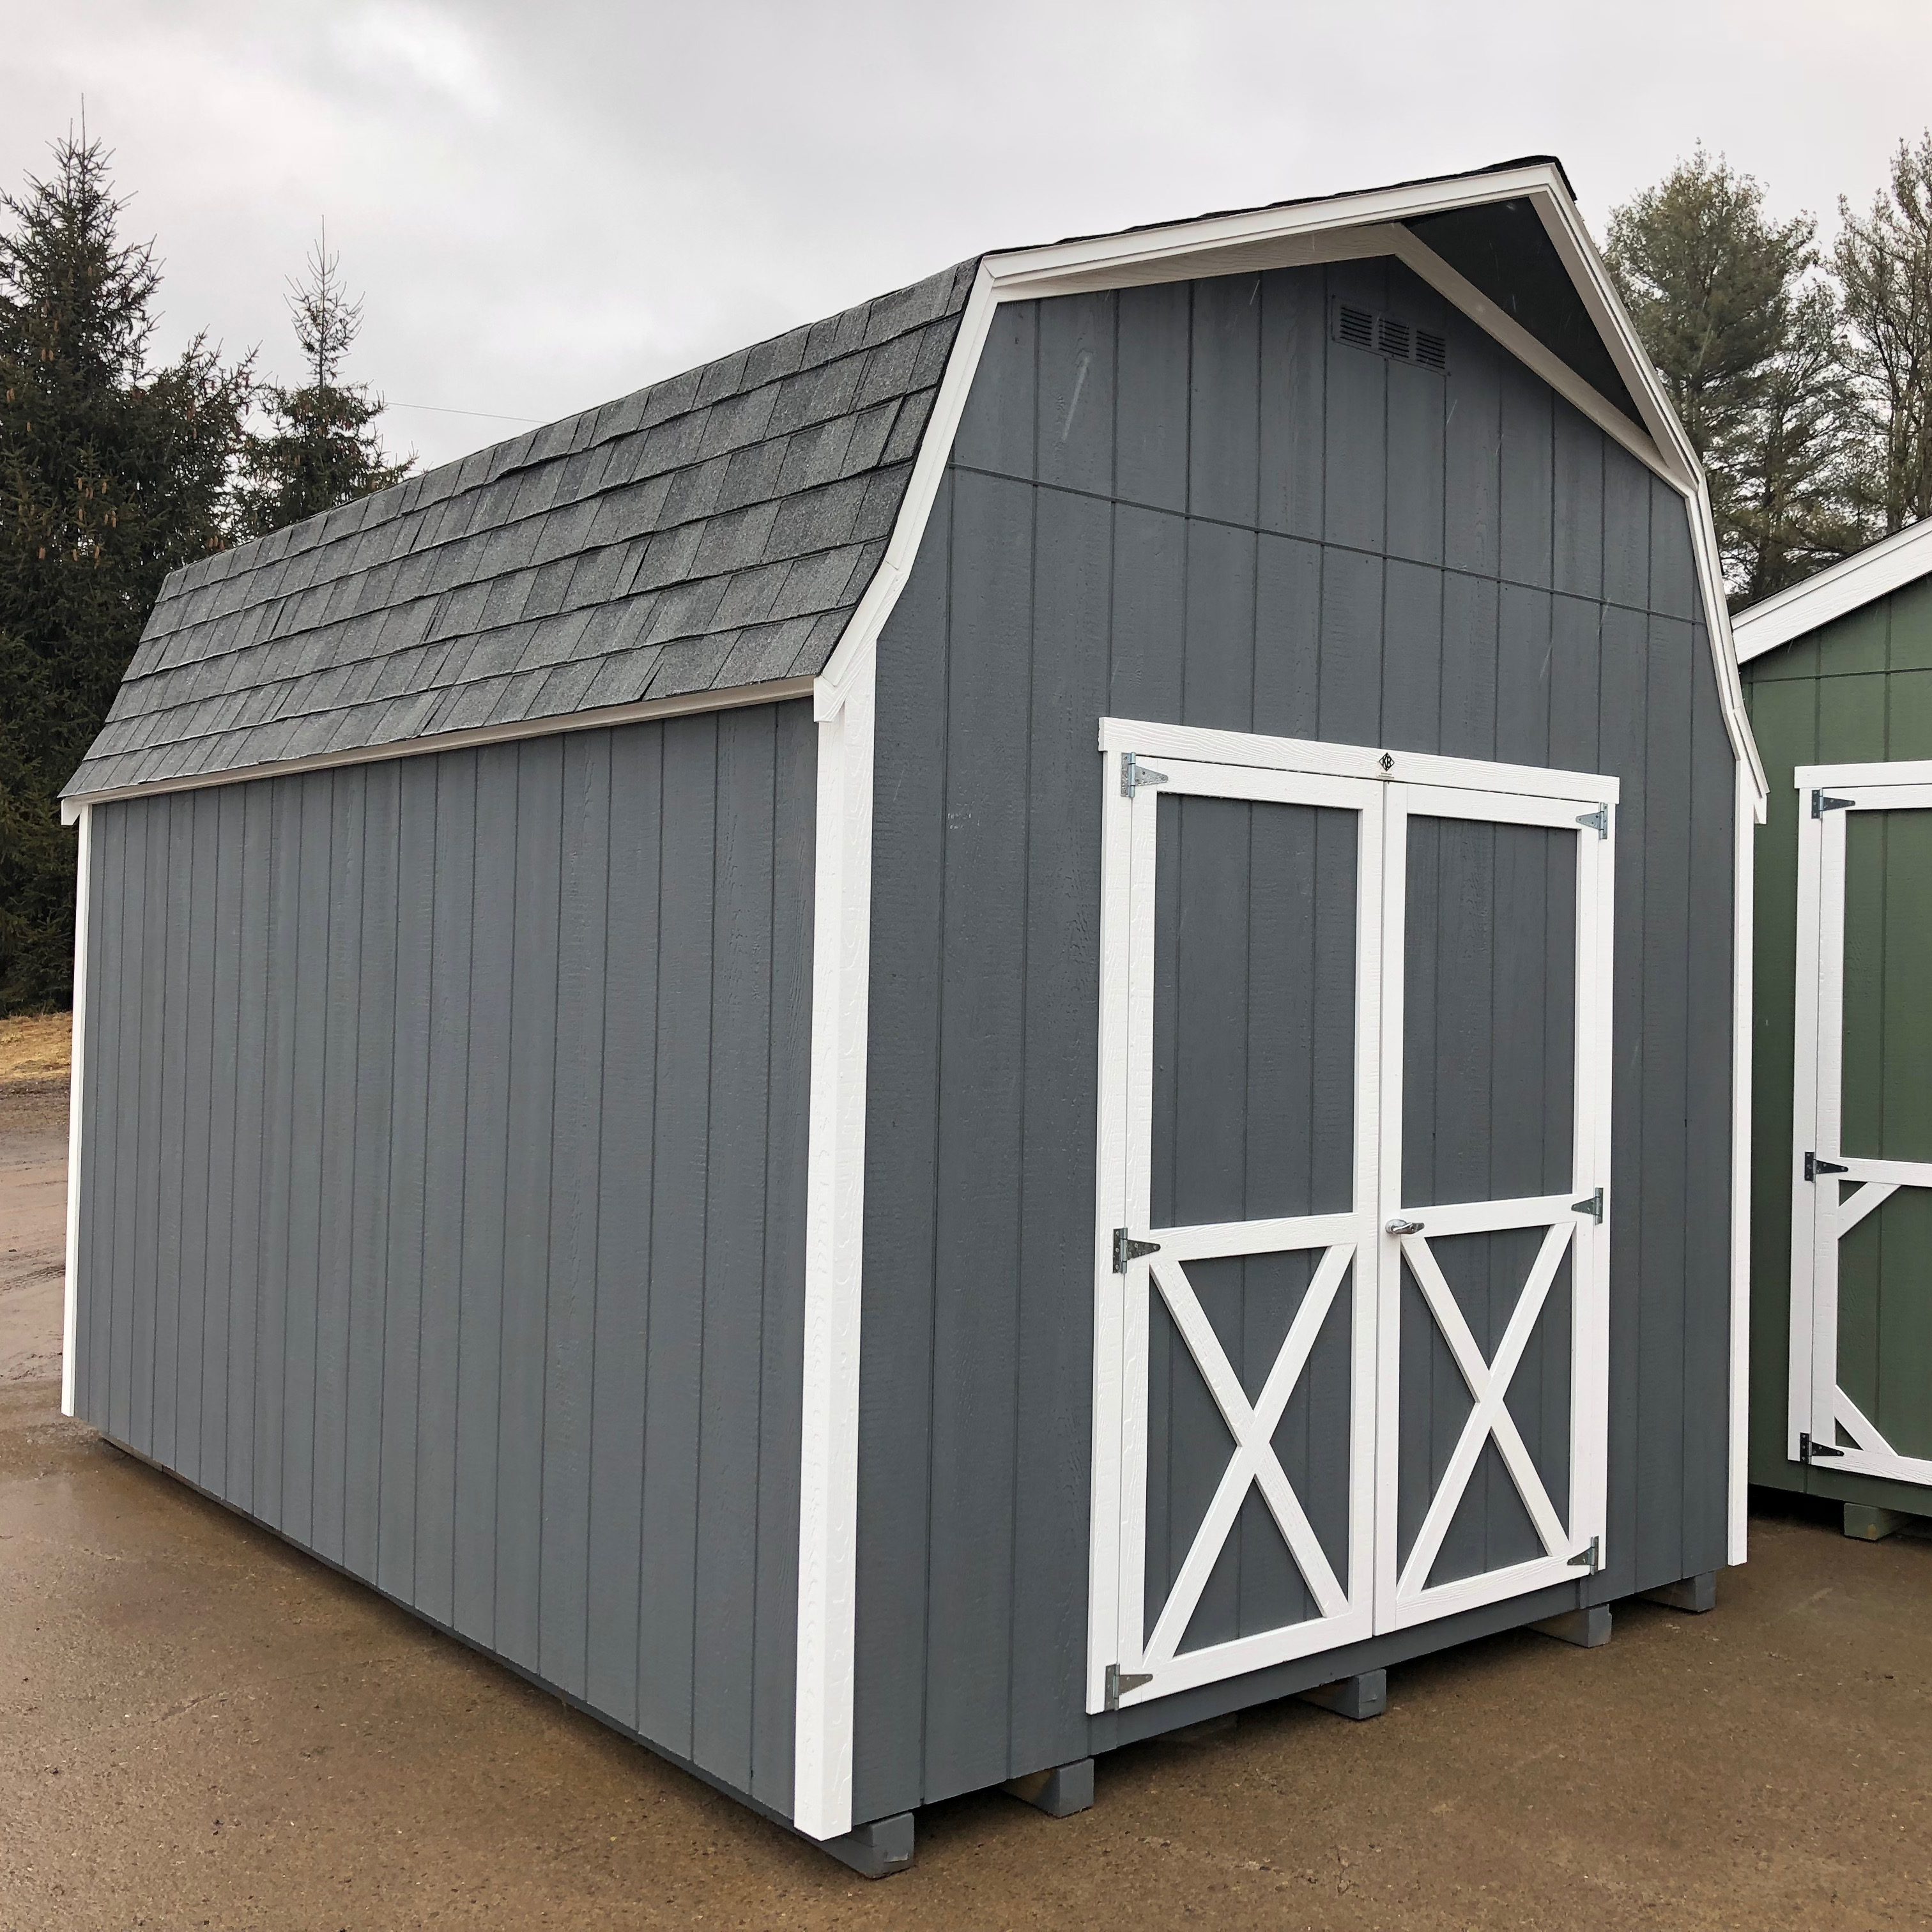 Kauffman High Sided Storage Shed with Double Door Entry